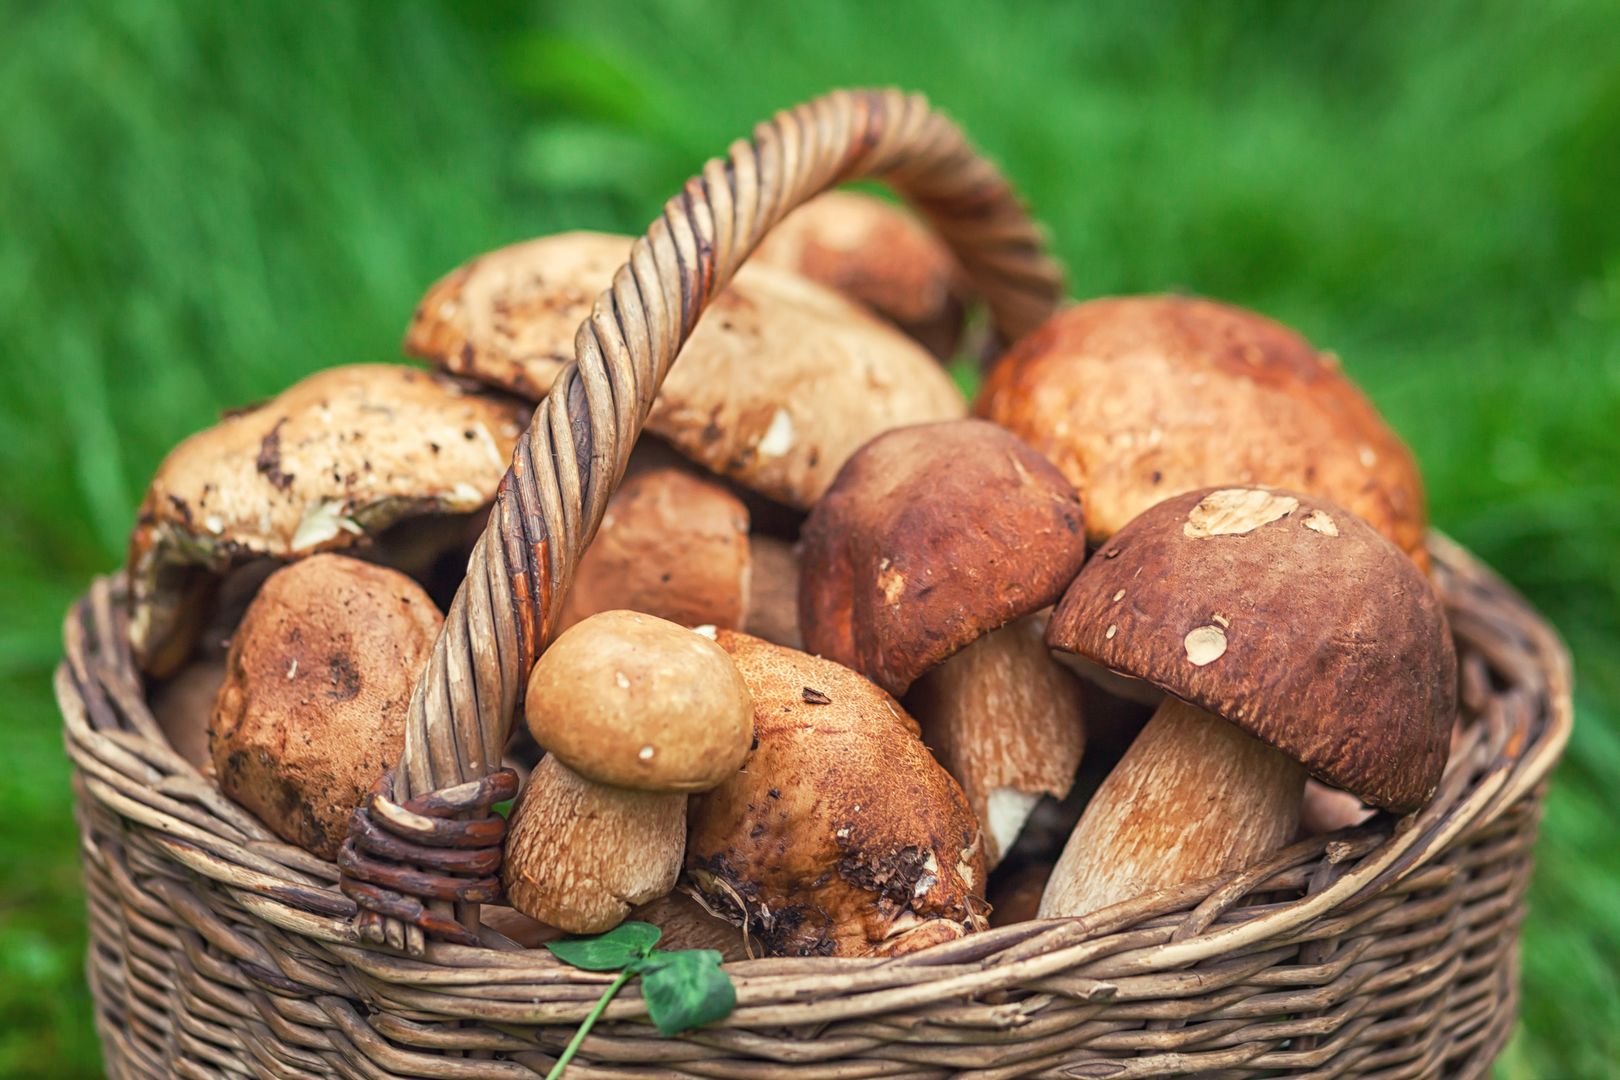 A wicker brown basket with beautiful large forest white mushrooms with rind hats stands on a lawn with bright green grass.  Close up white mushrooms